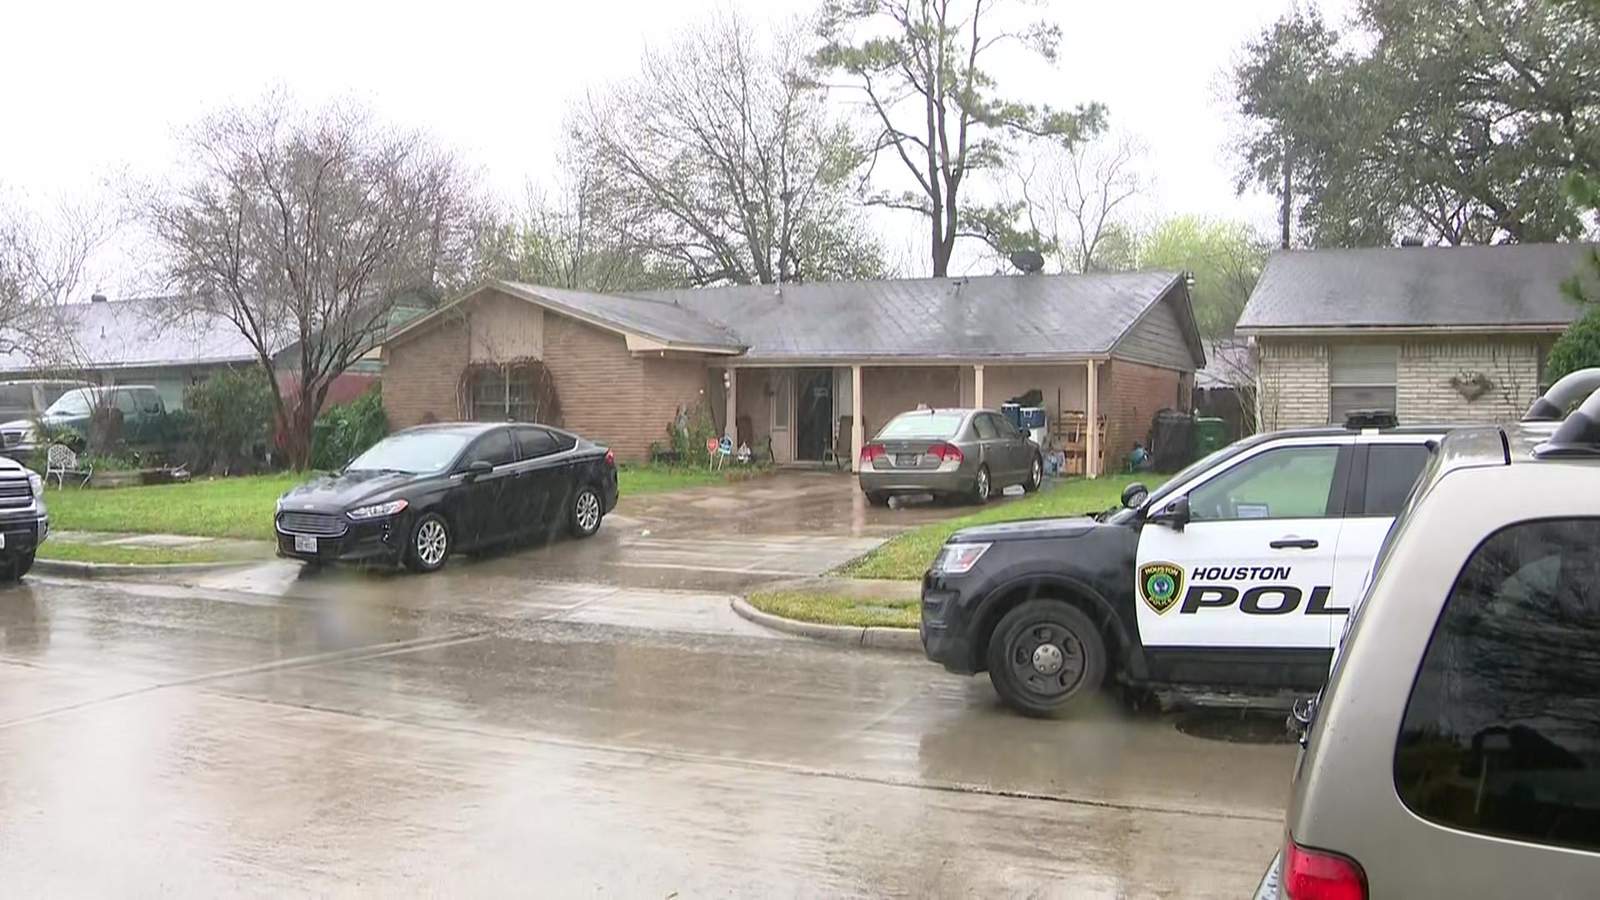 Family held at gunpoint during home invasion in SW Houston; man shot in hand, police say